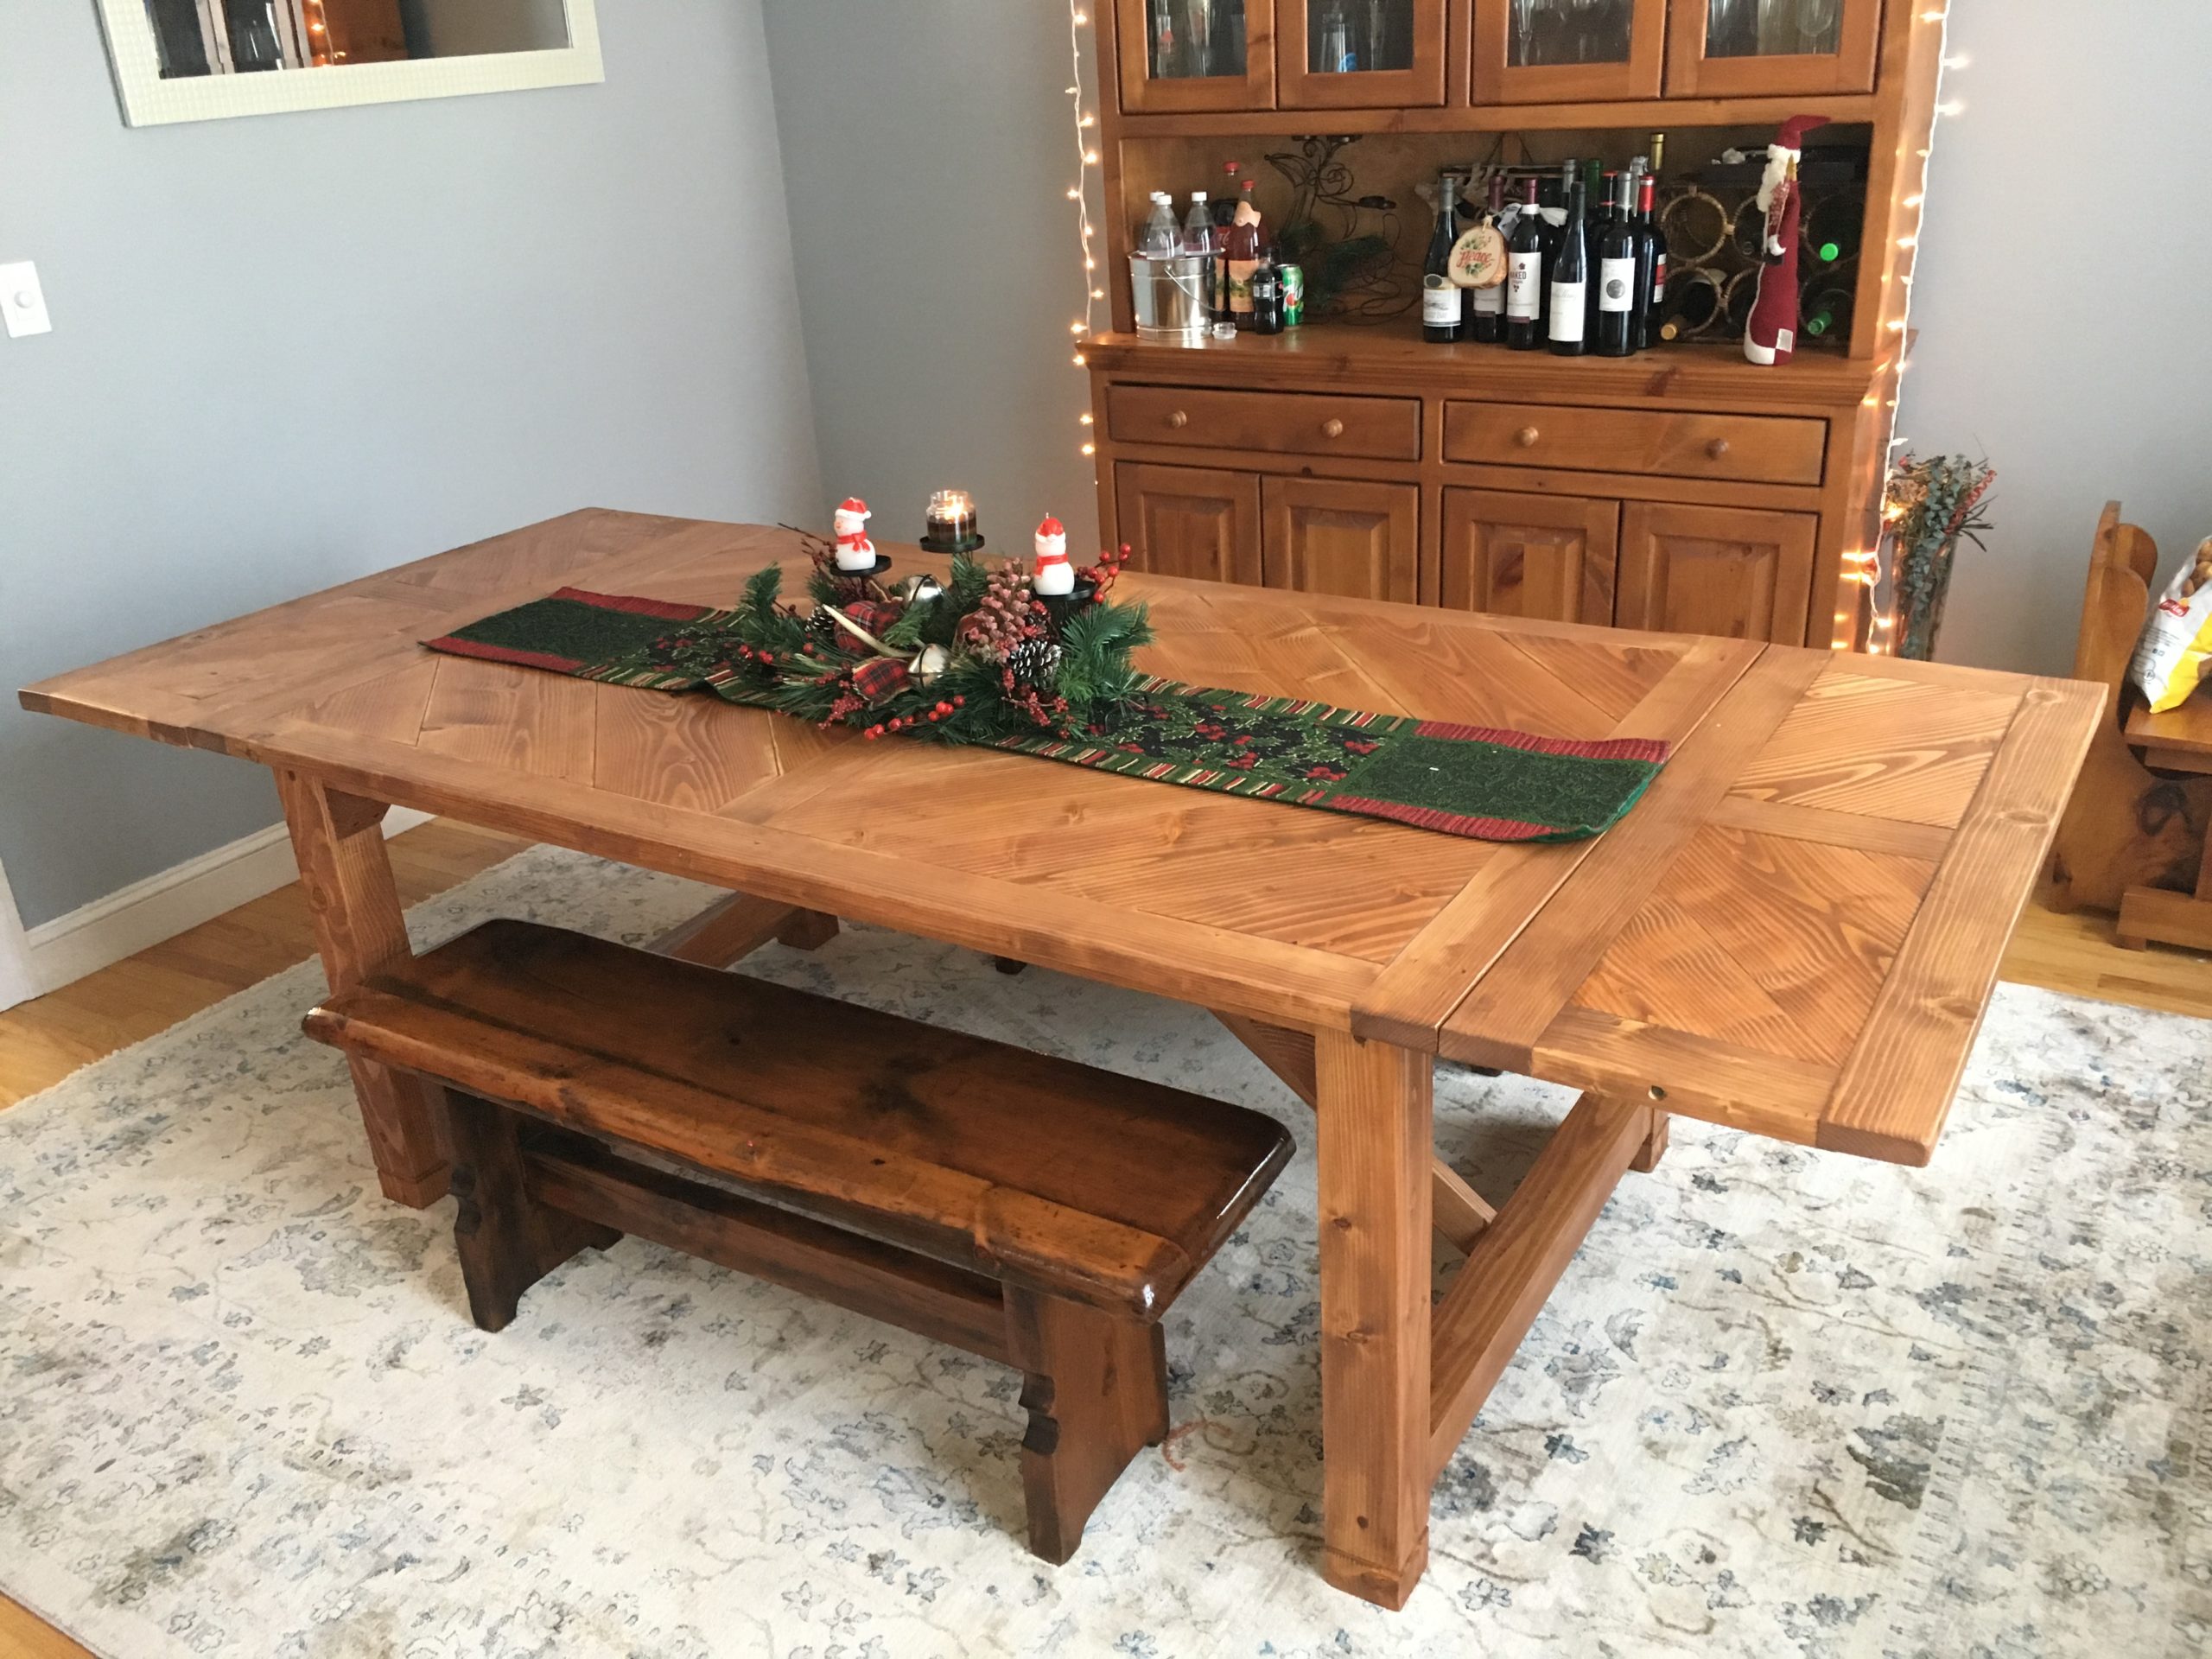 Value Of A Handmade Dining Room Table